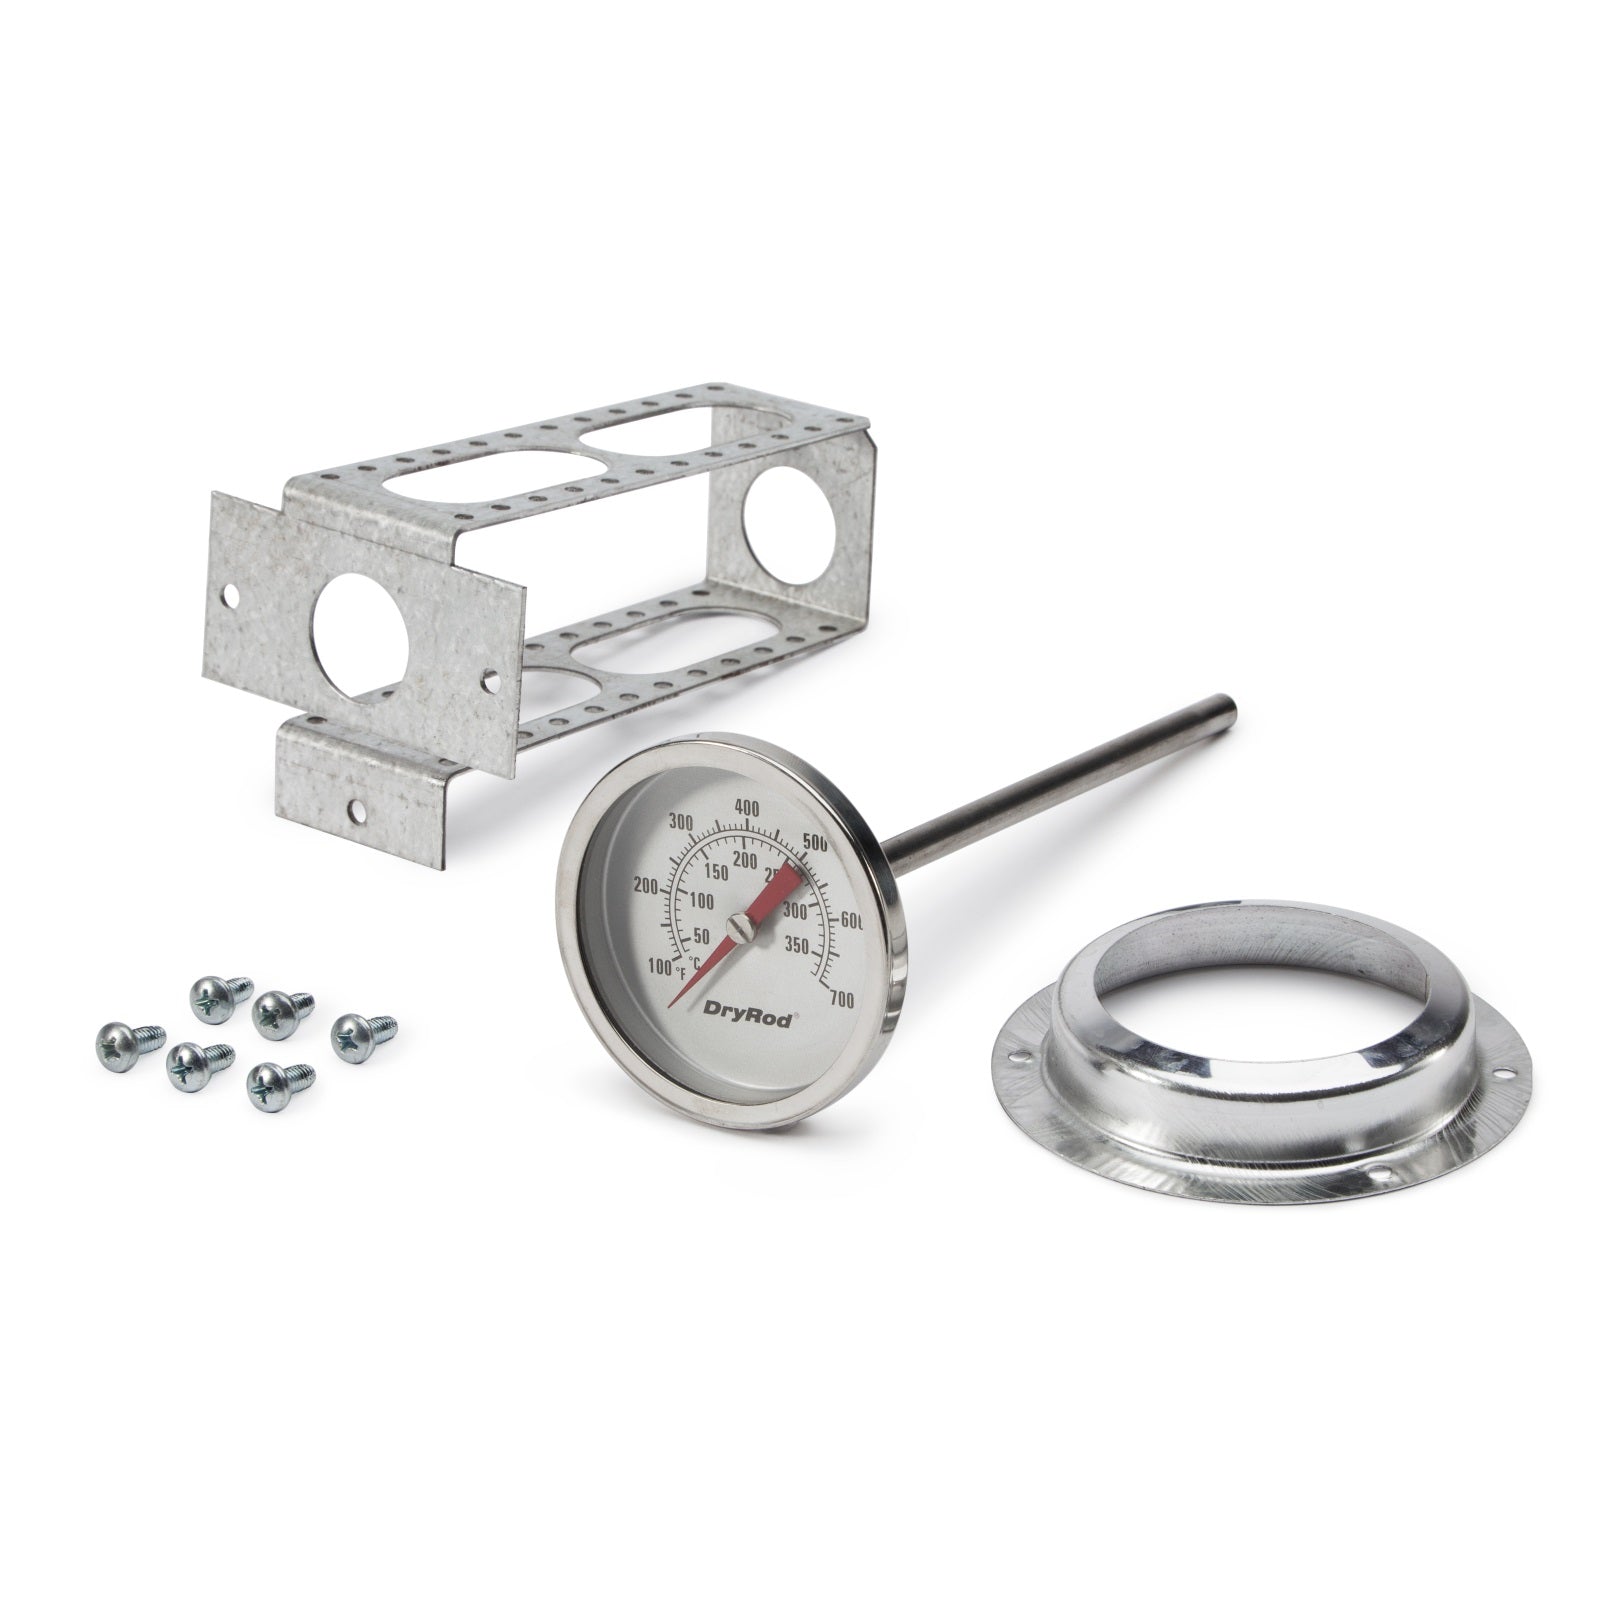 Lincoln Hydroguard Rod Oven Thermometer Kit (K3148-1)